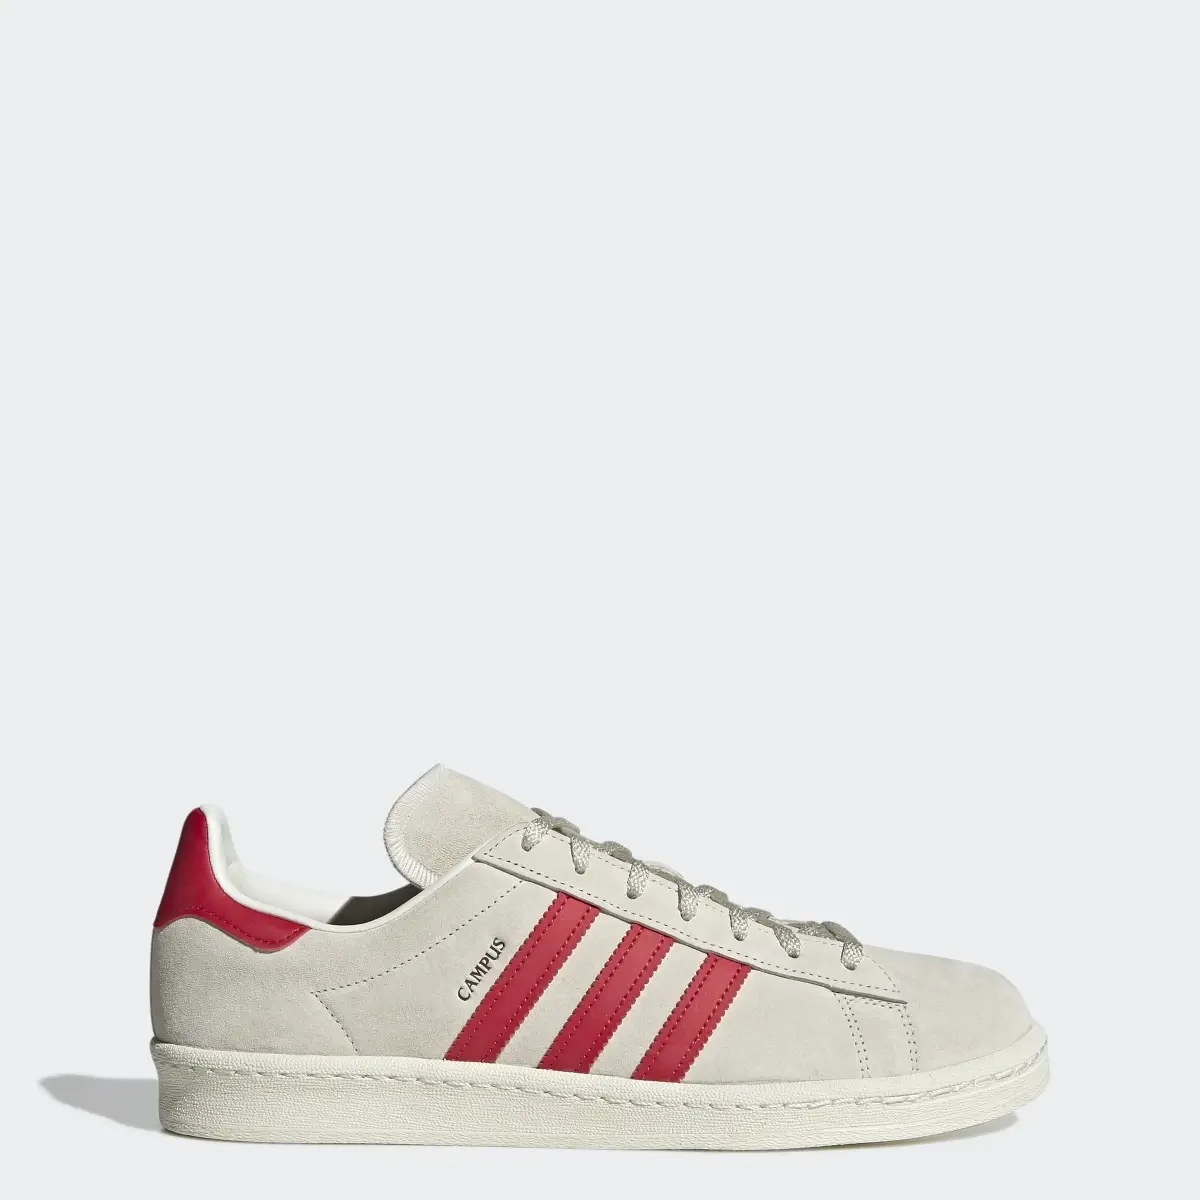 Adidas Campus 80s Shoes. 1